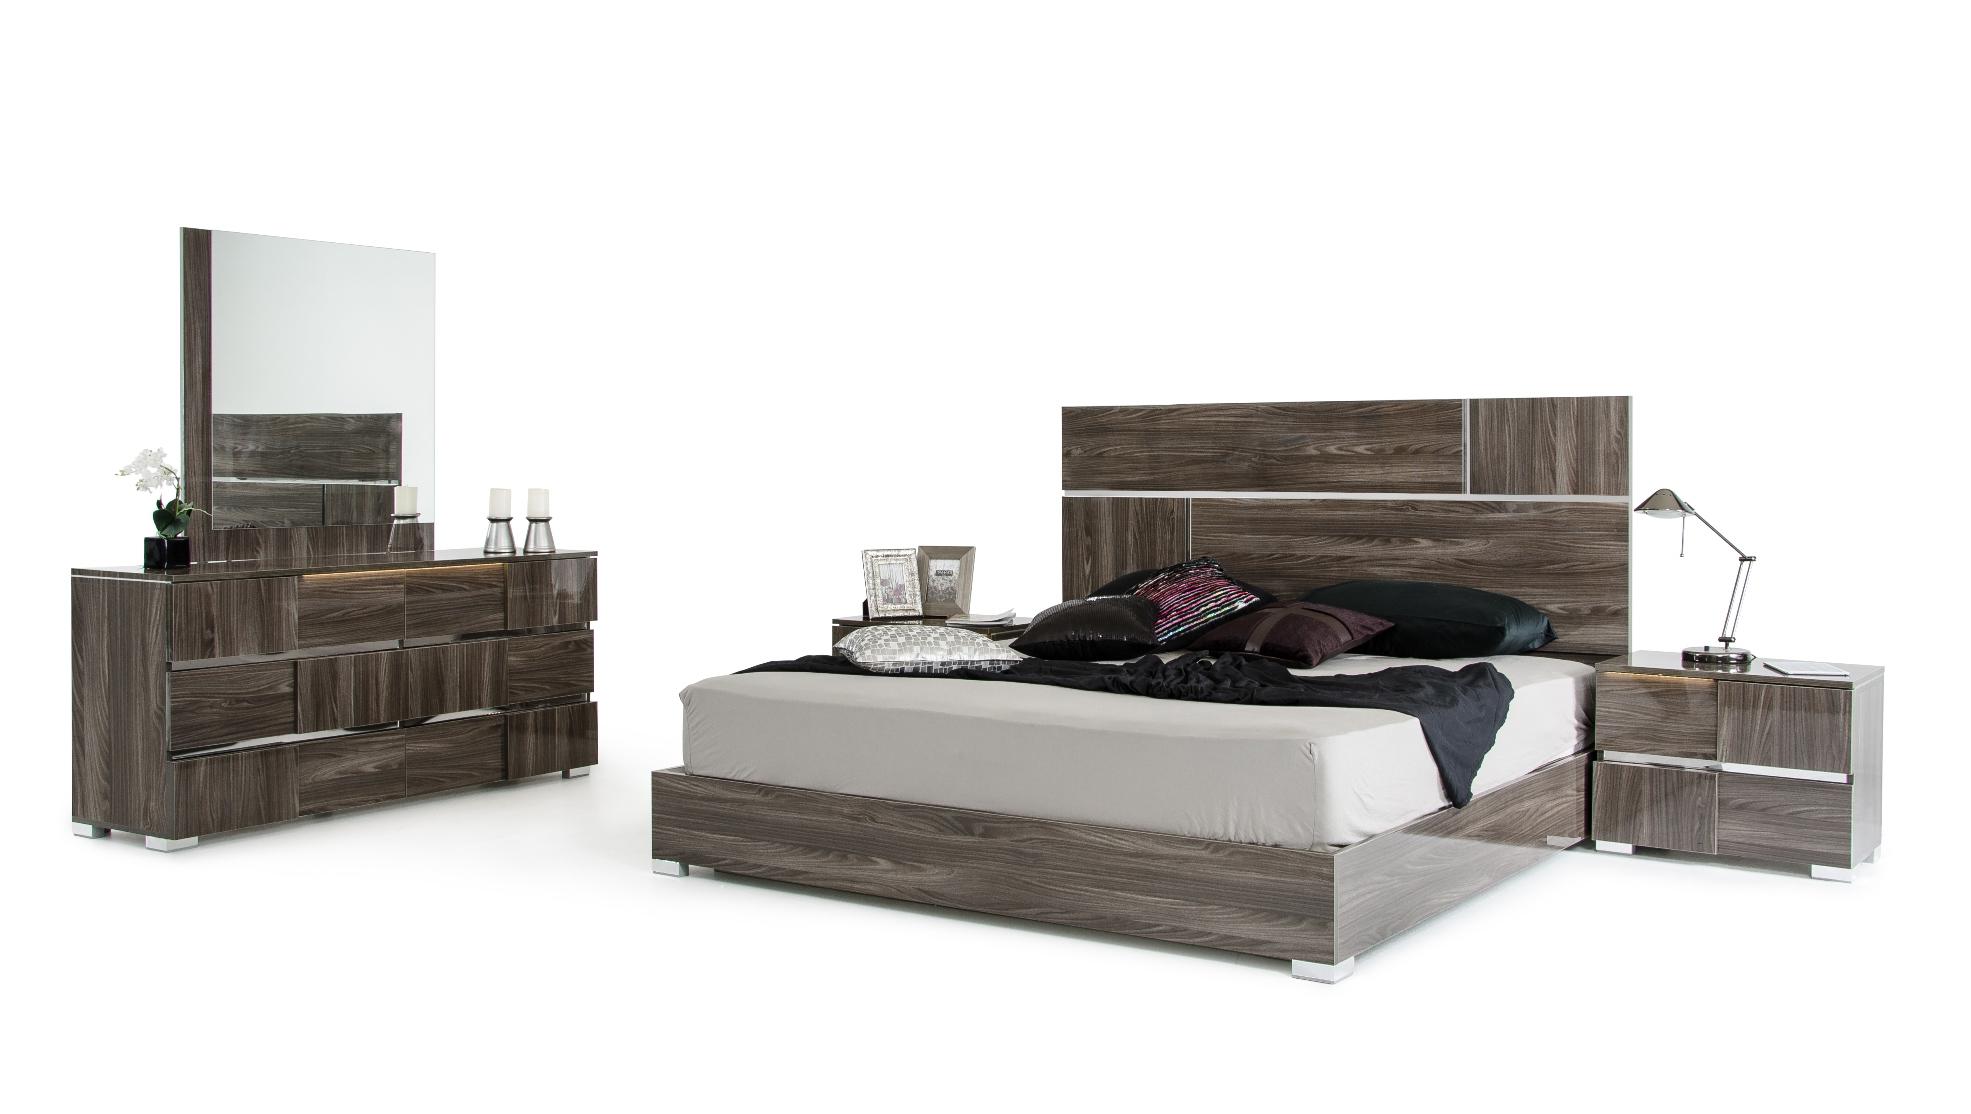 

    
VGACPICASSO-BED-GRY-Q-Set-3 VIG Modrest Picasso Elm Grey Lacquer Finish Queen Bedroom Set 3Pcs Made In Italy
